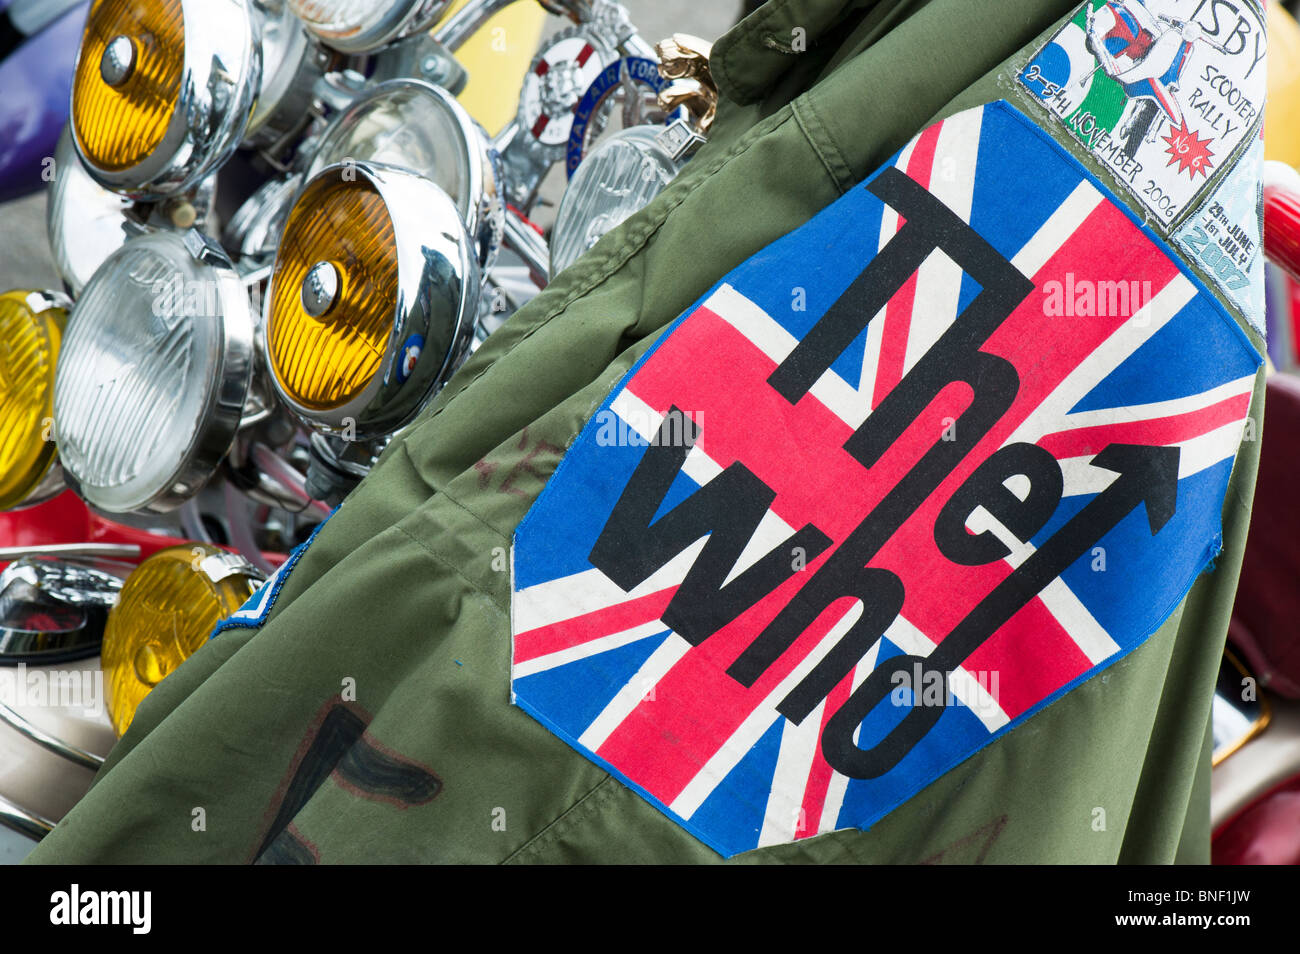 Mod jacket on a Lambretta custom scooter with logos and union jack decal Stock Photo